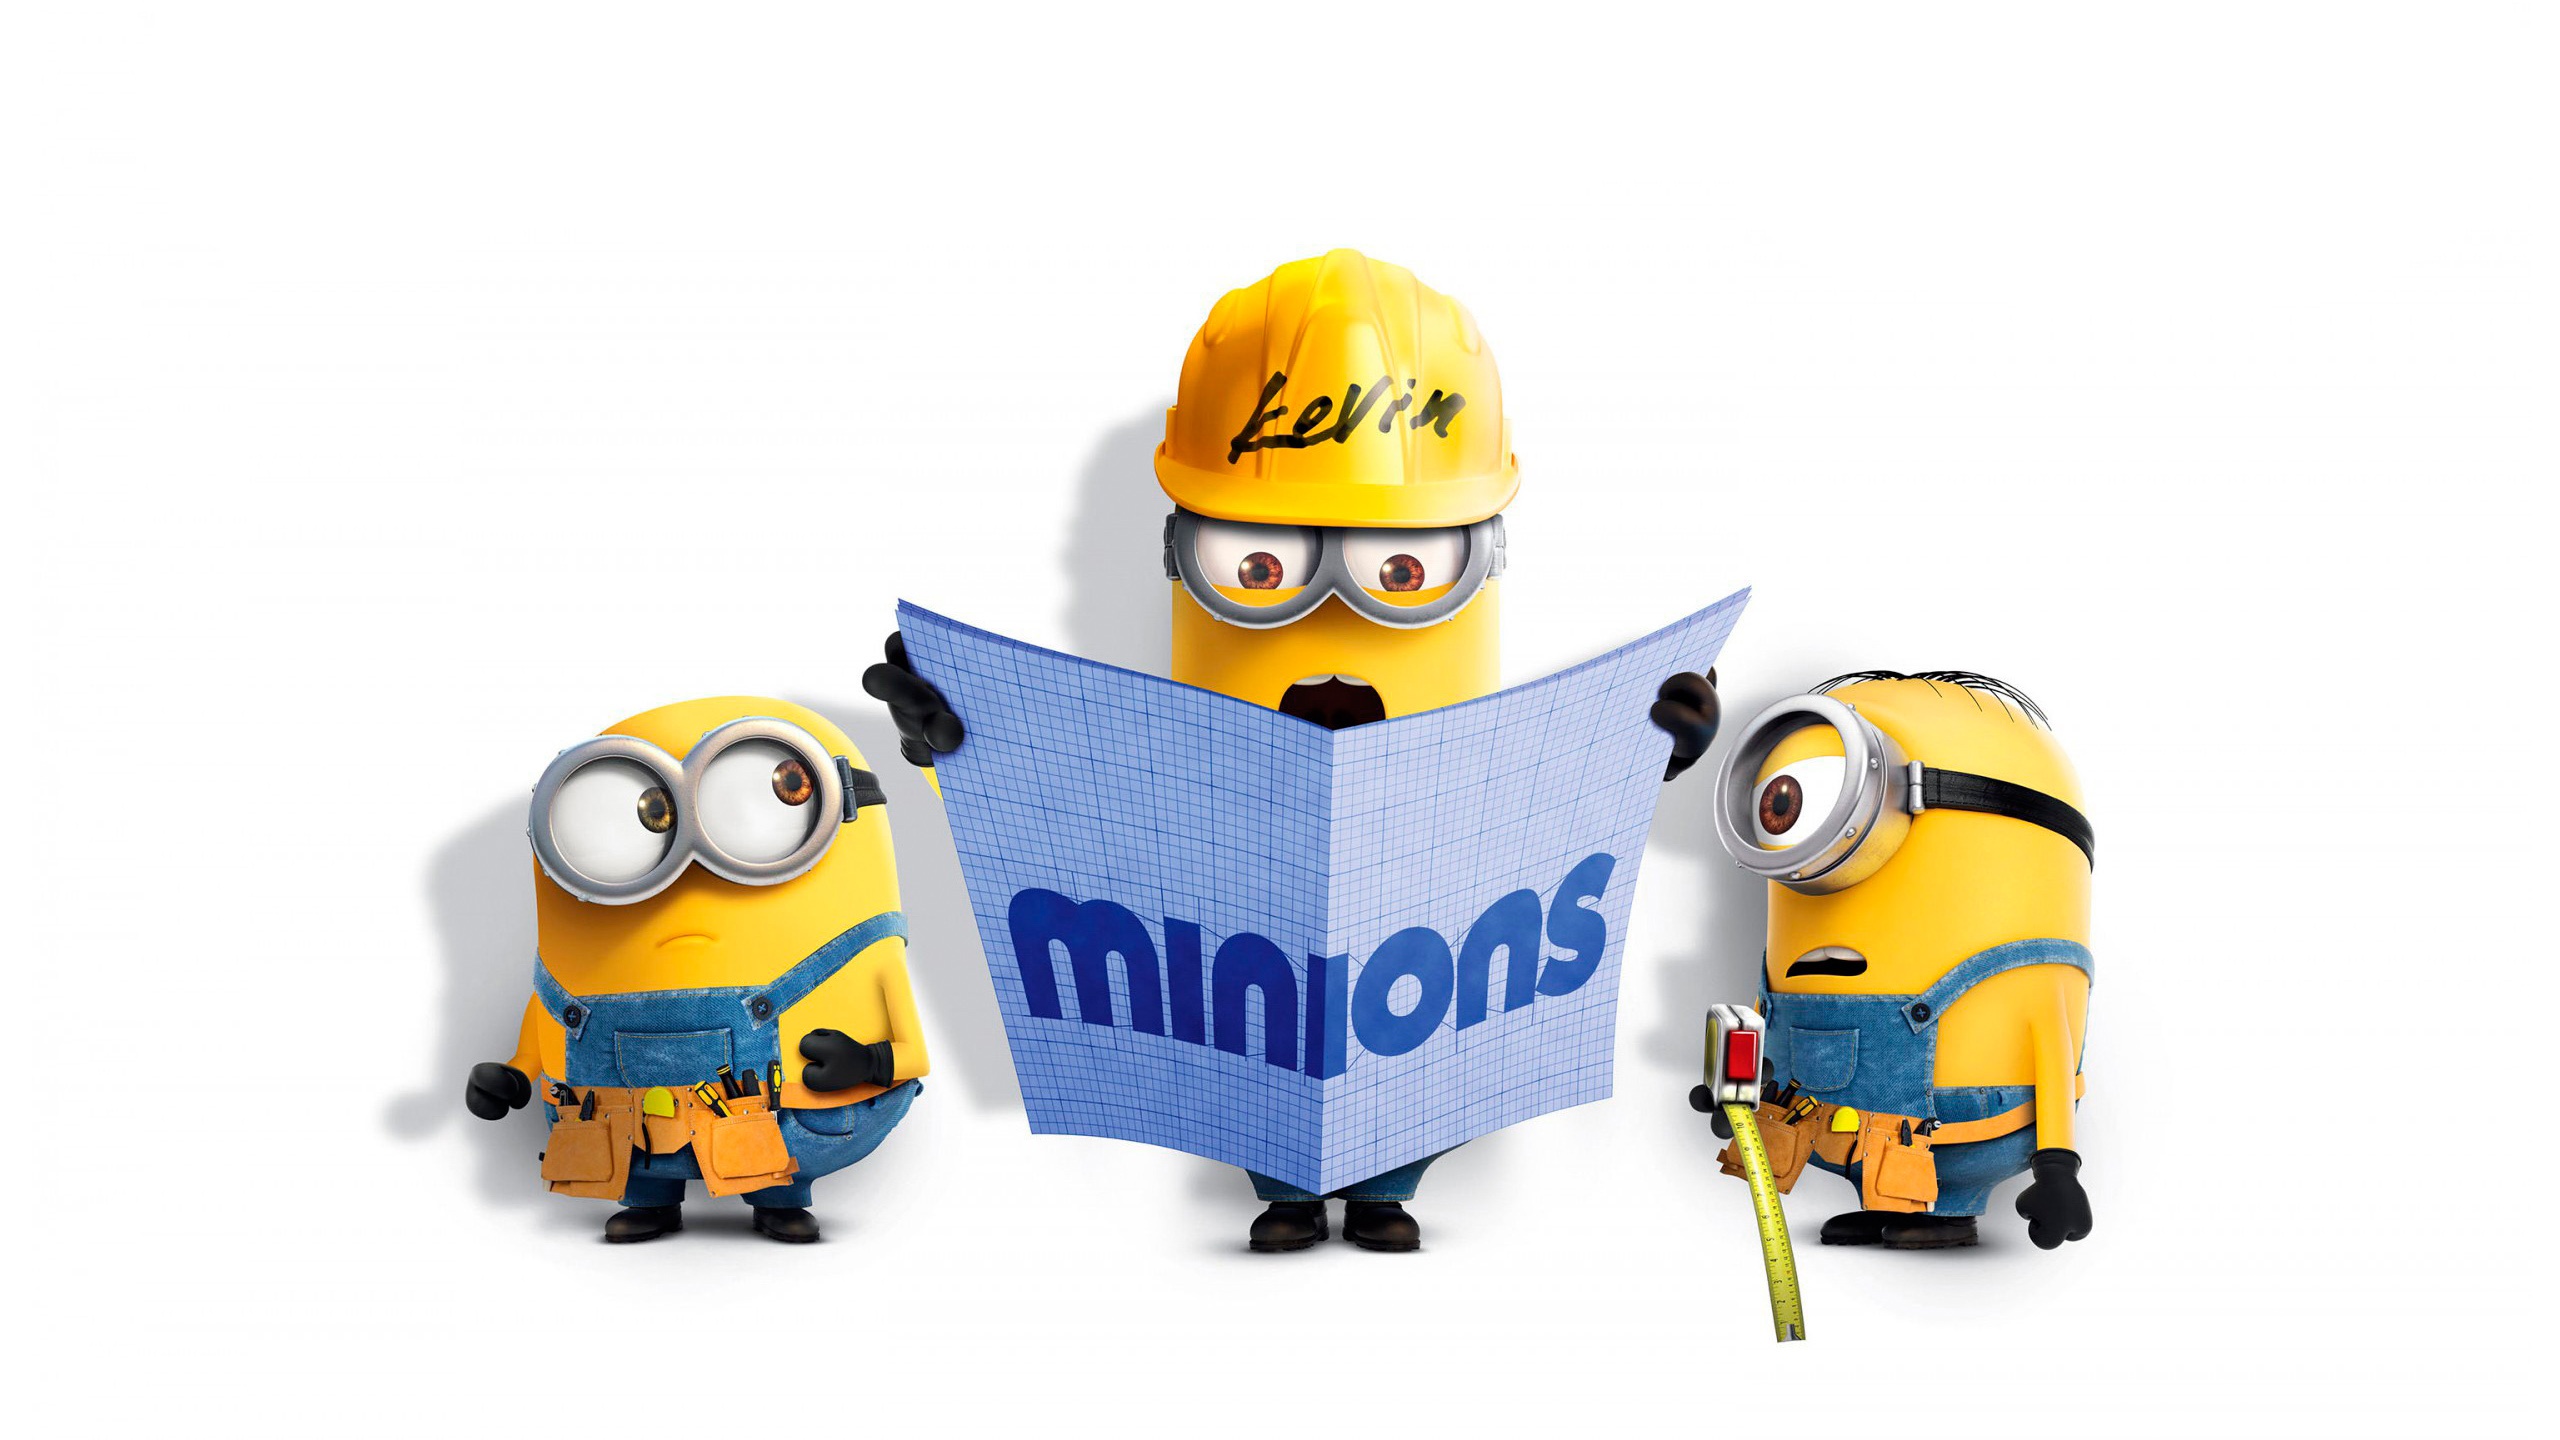 General 2560x1440 minions white animation movie characters digital art simple background